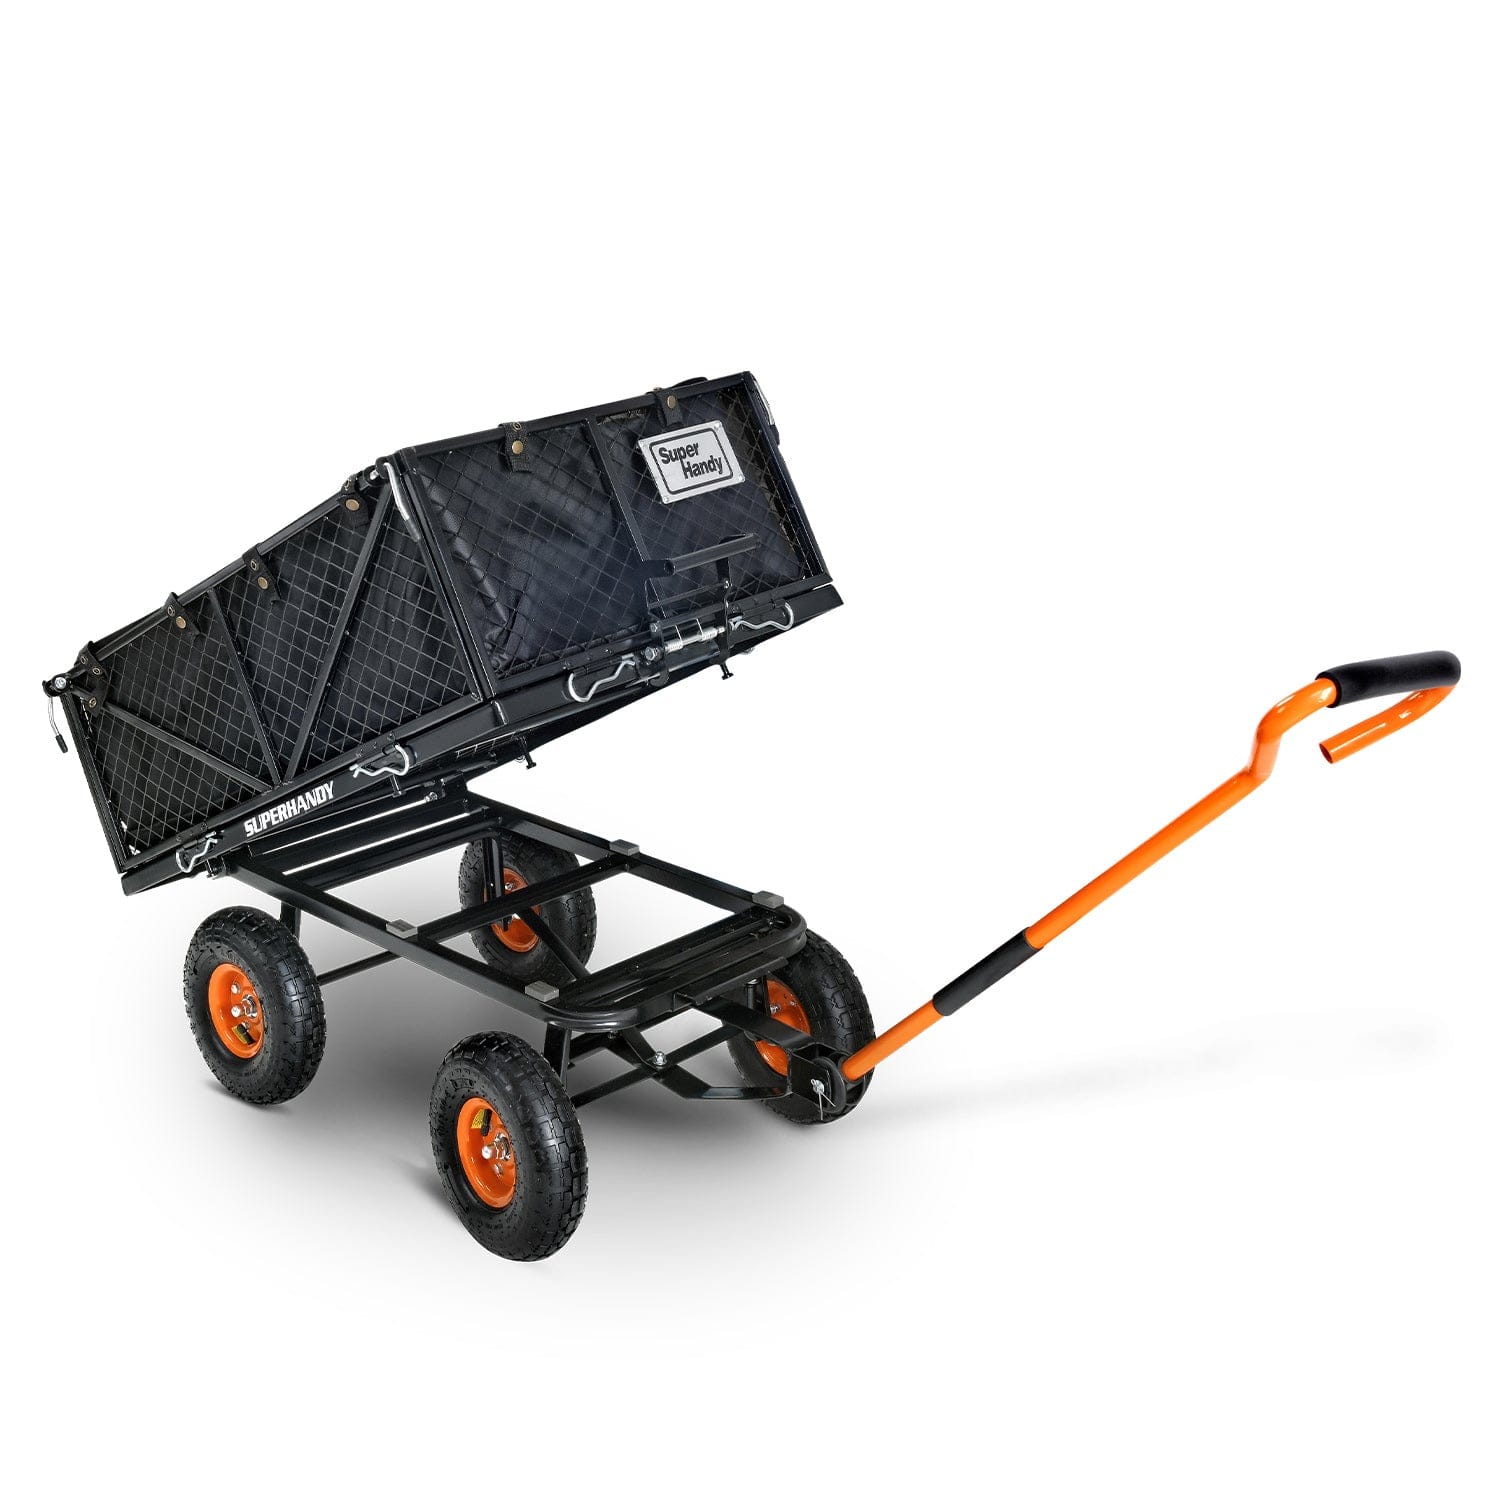 SuperHandy Towable Garden Cart - Quick Dump System, 10" Tires, Connects with Tugger Scooter